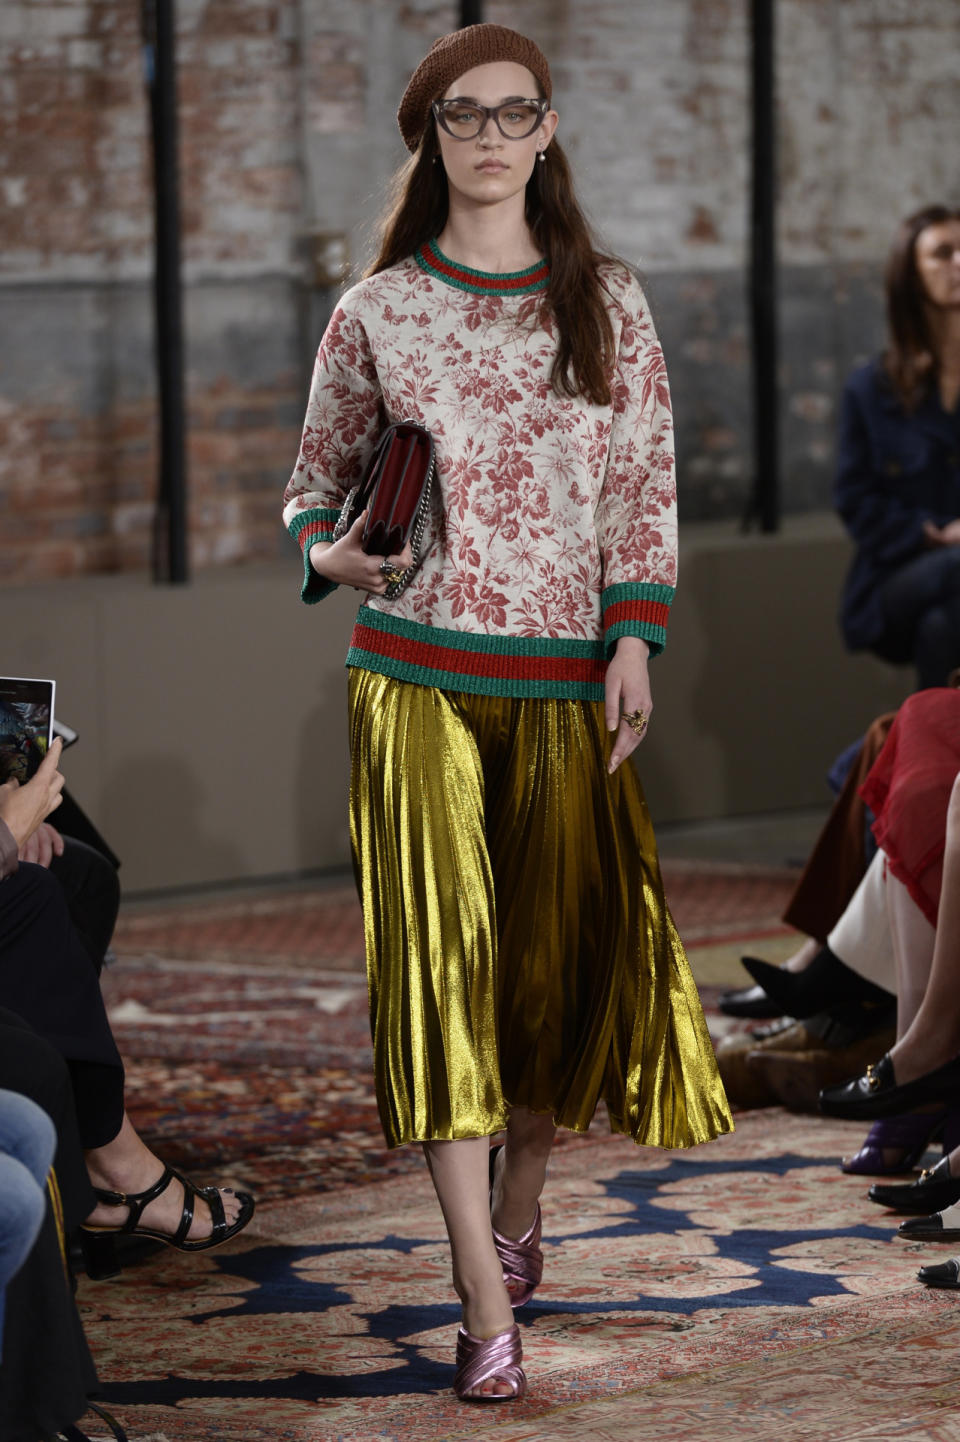 Floral sweatshirt and yellow lam? skirt from the Gucci Resort show.